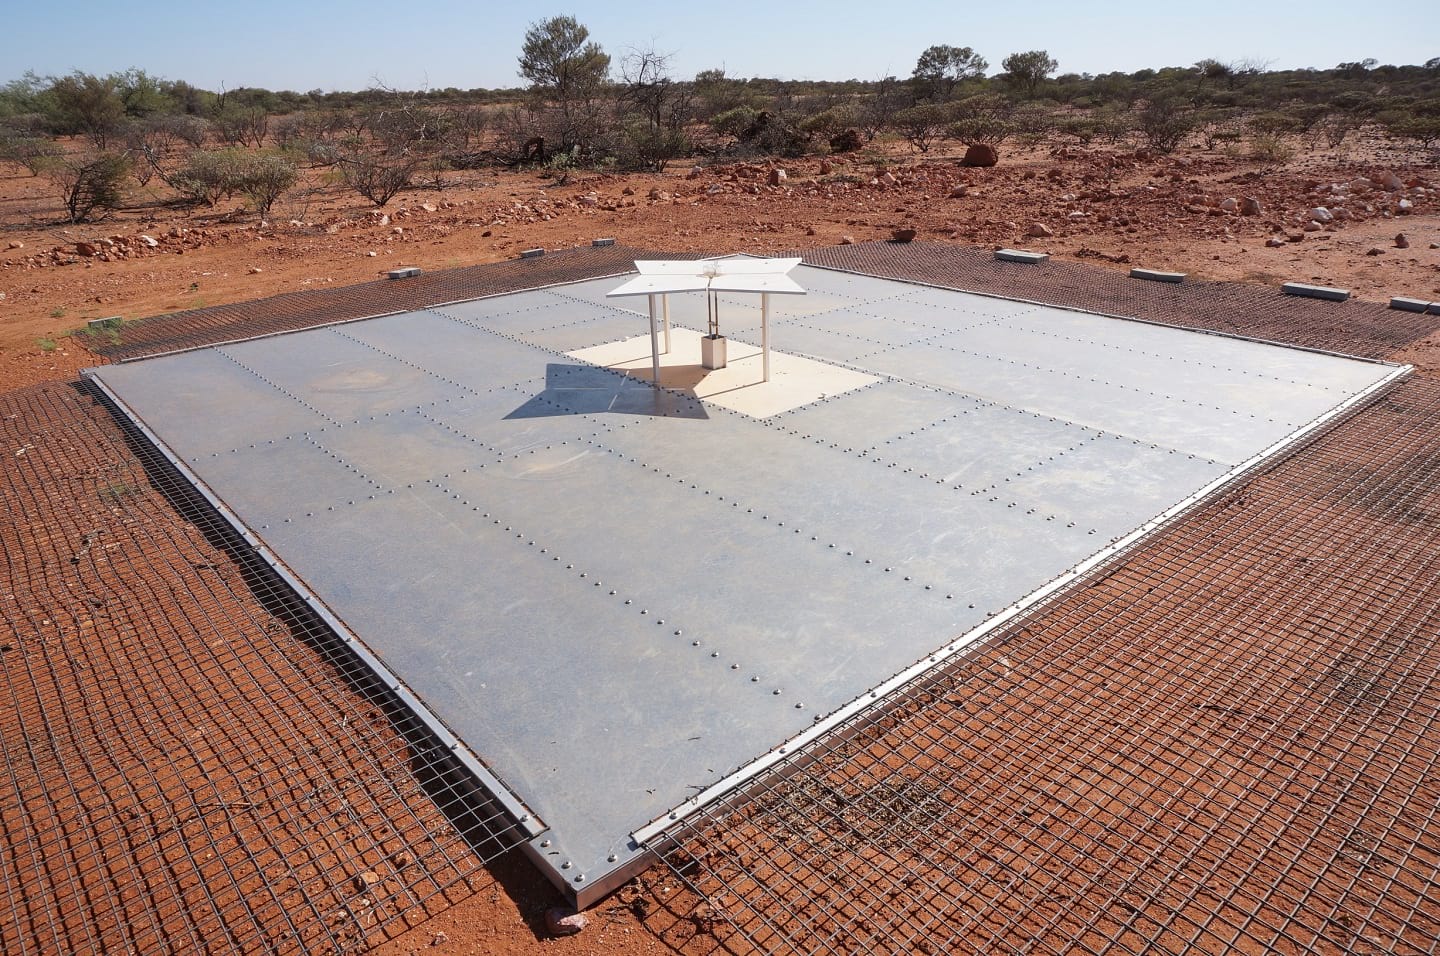 The antenna and Low Noise amplifier for the EDGES experiment, at the Murchison Radio-astronomy Observatory in Western Australia